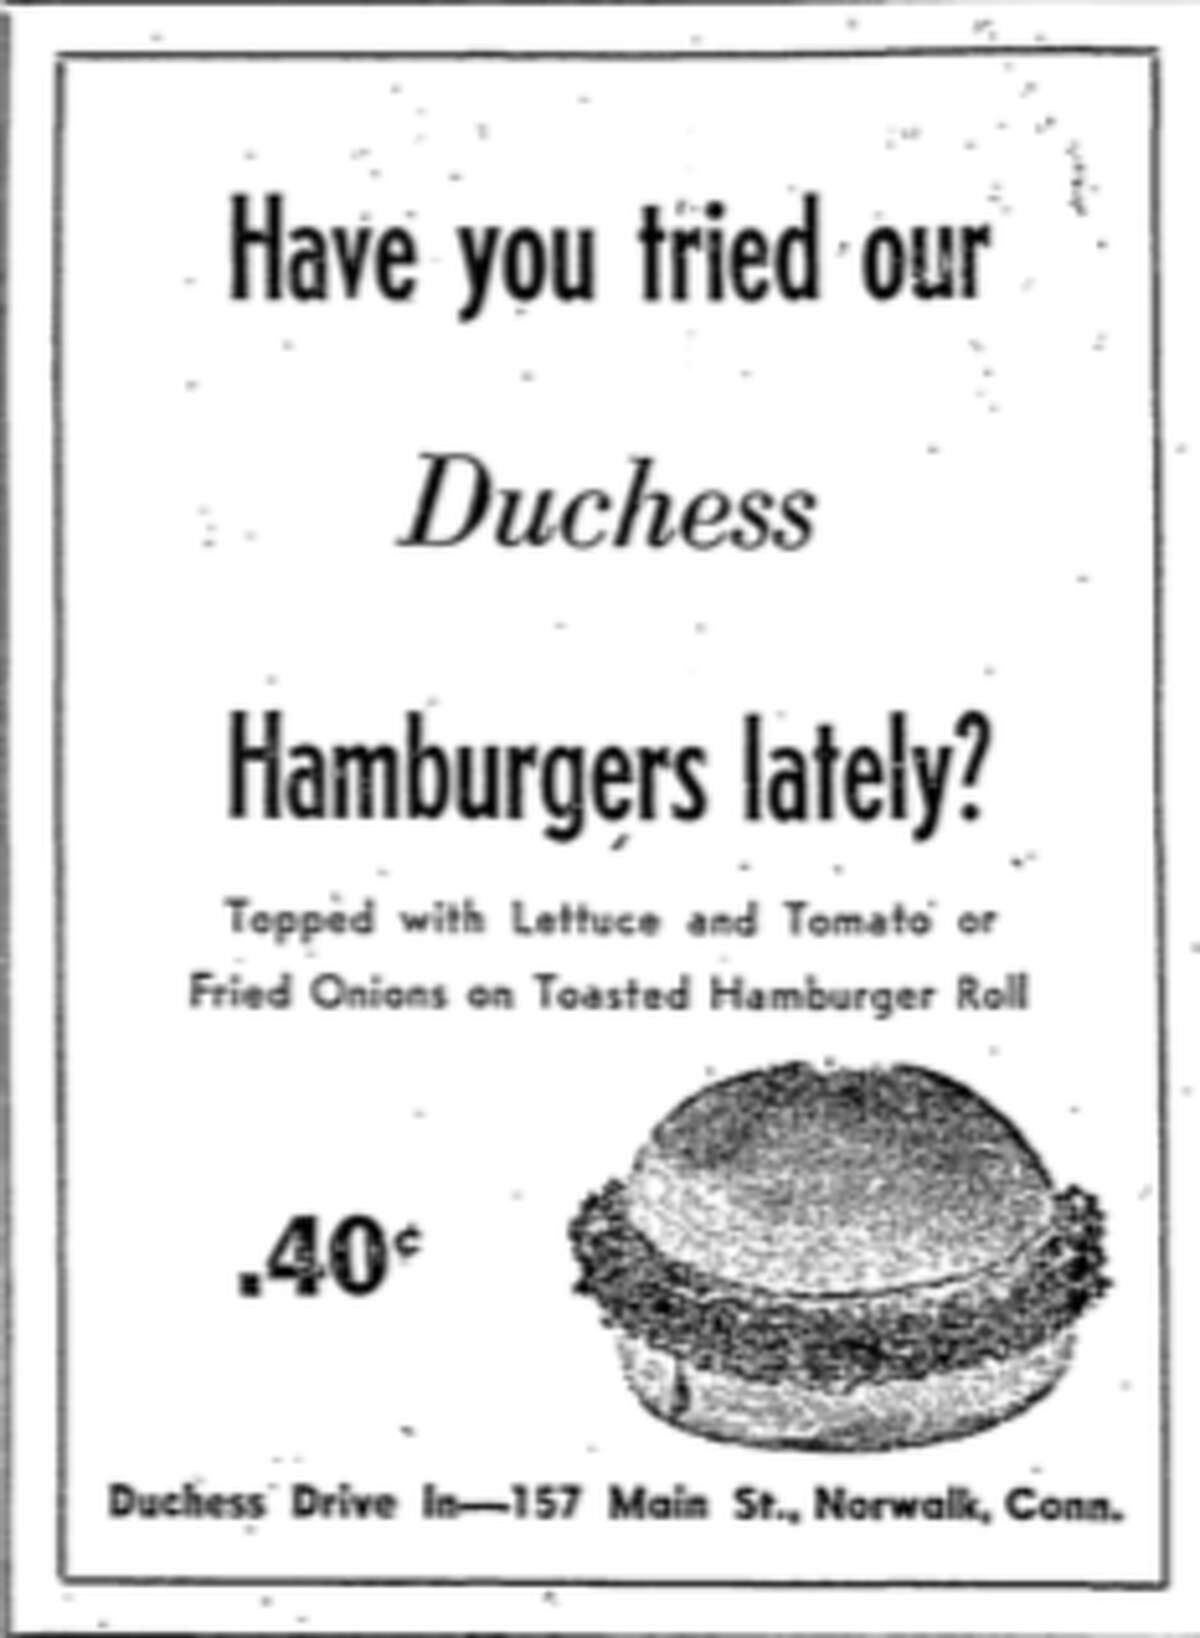 An advertisement for Duchess as it appeared in the Norwalk Hour in 1970.